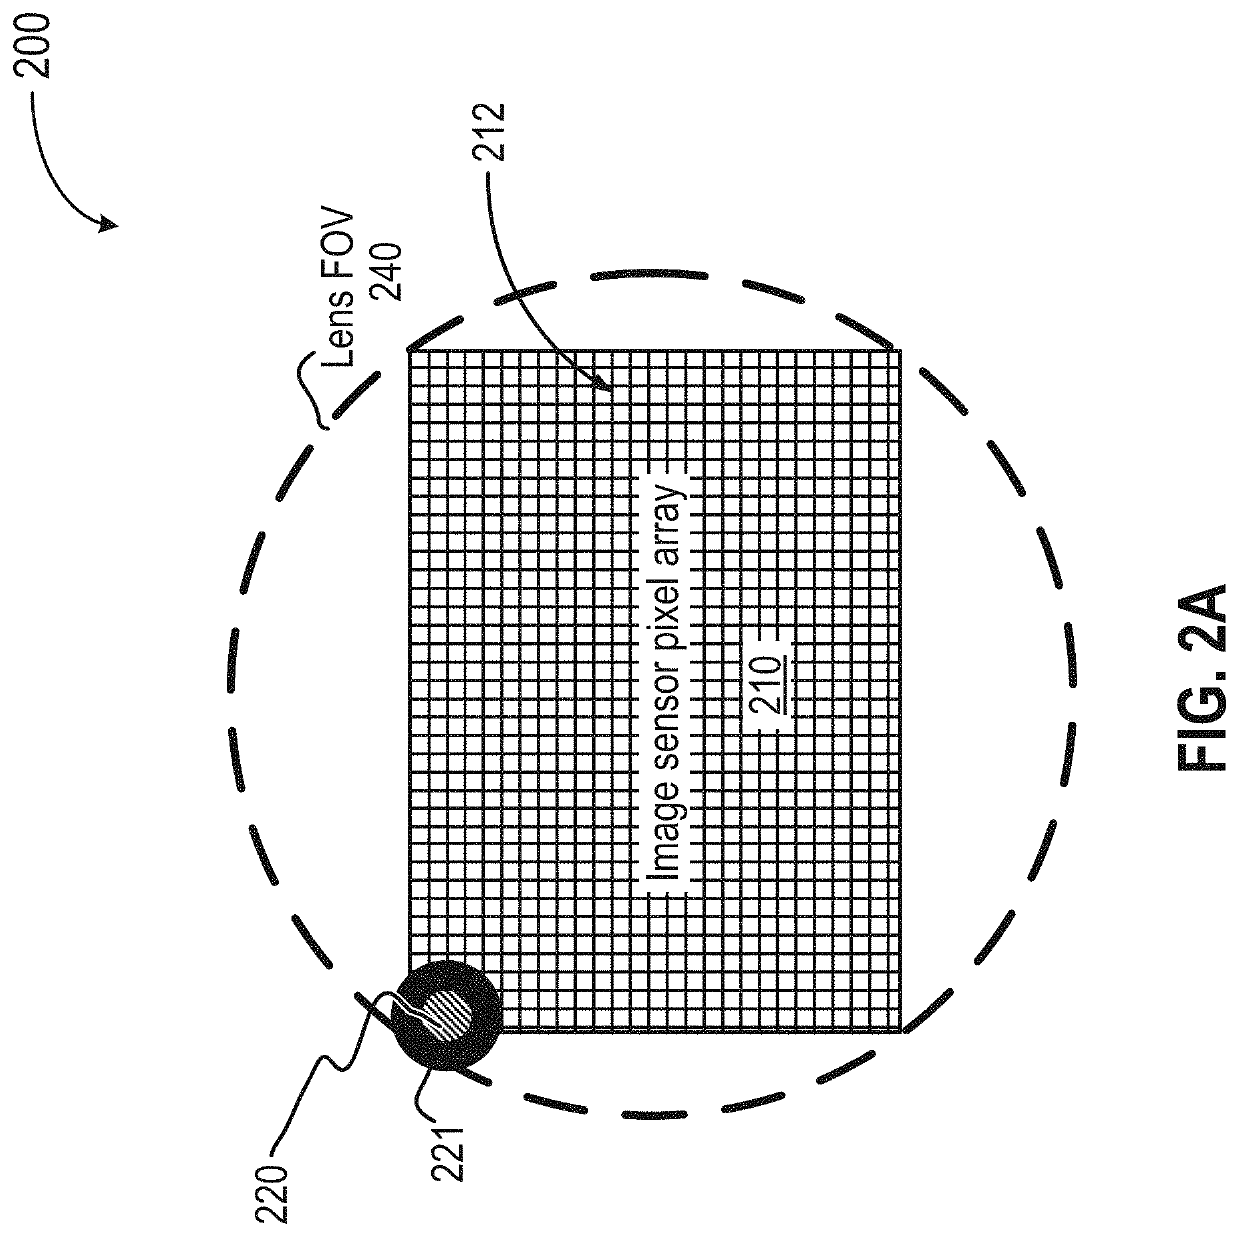 Global shutter pixel circuit and method for computer vision applications